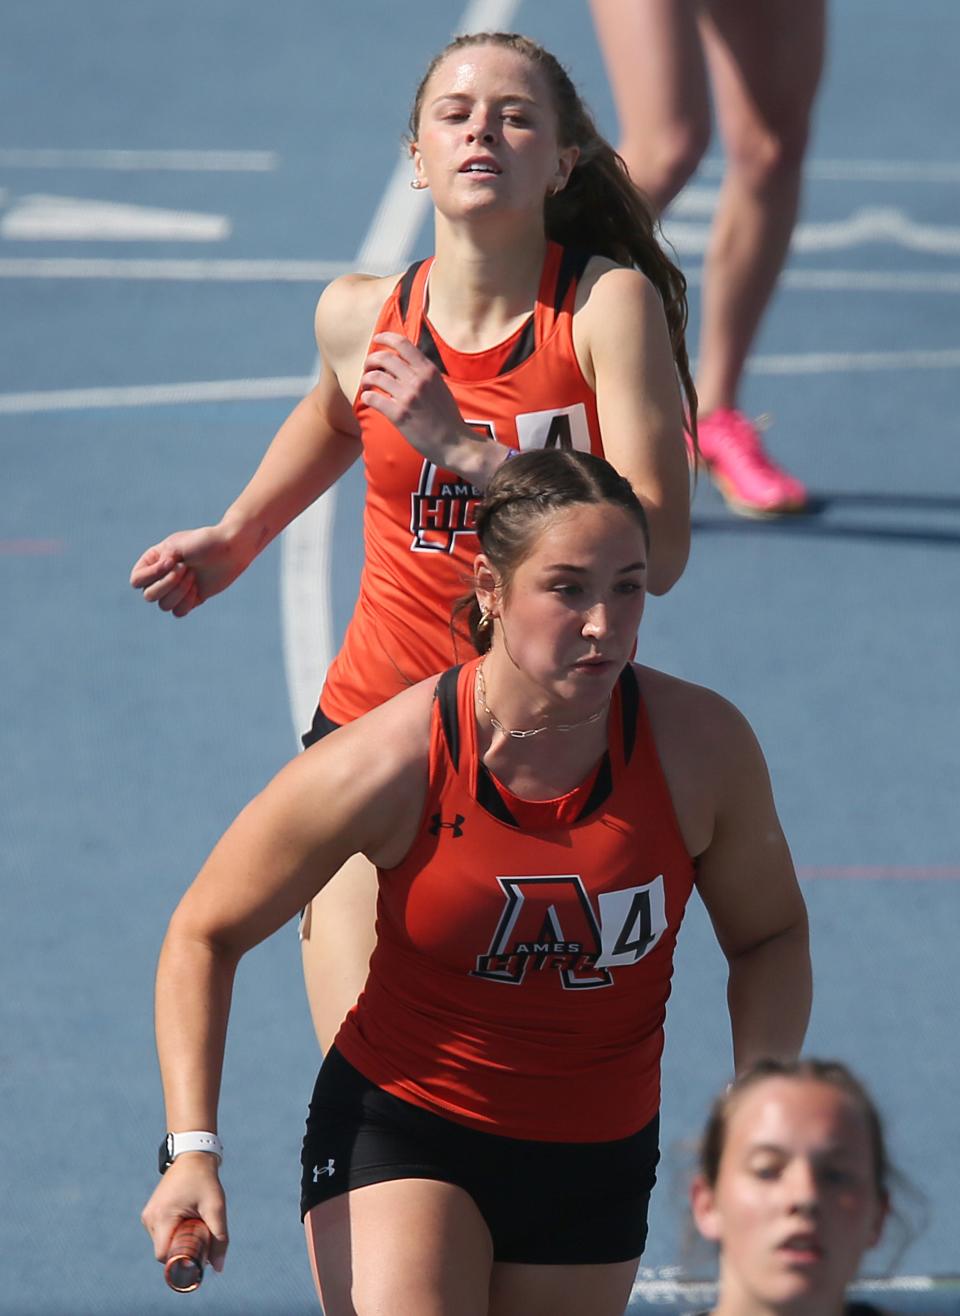 Ames junior Saylor Horras was an important part of the Little Cyclone girls track team's 4A state champion 4x400 relay team as a sophomore.